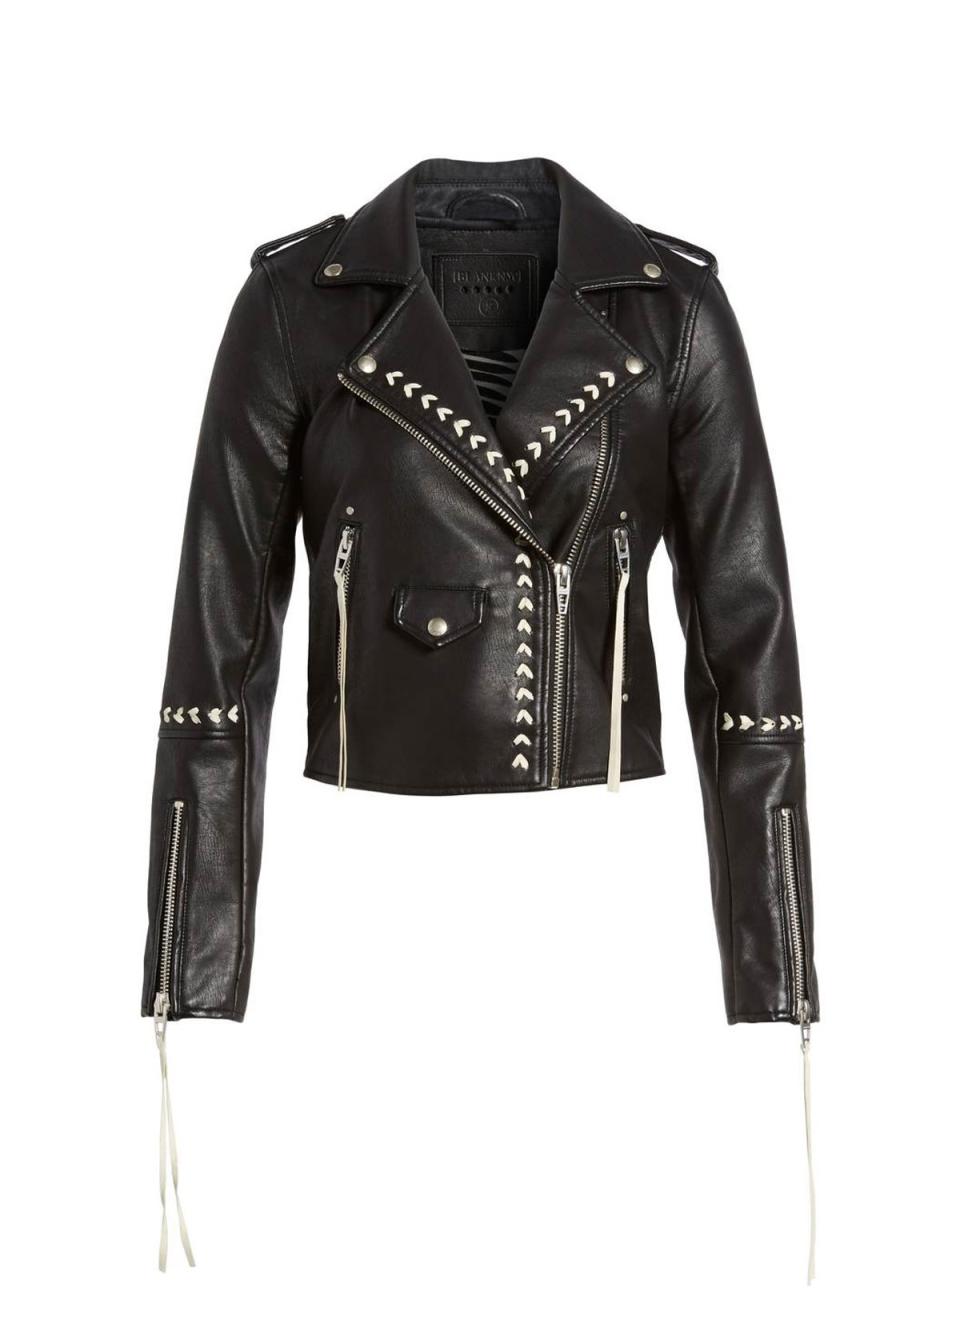 "Leather jackets are a staple, but this one offers a fun twist on a classic style—I can get a head start on the Western trend for fall." —AC